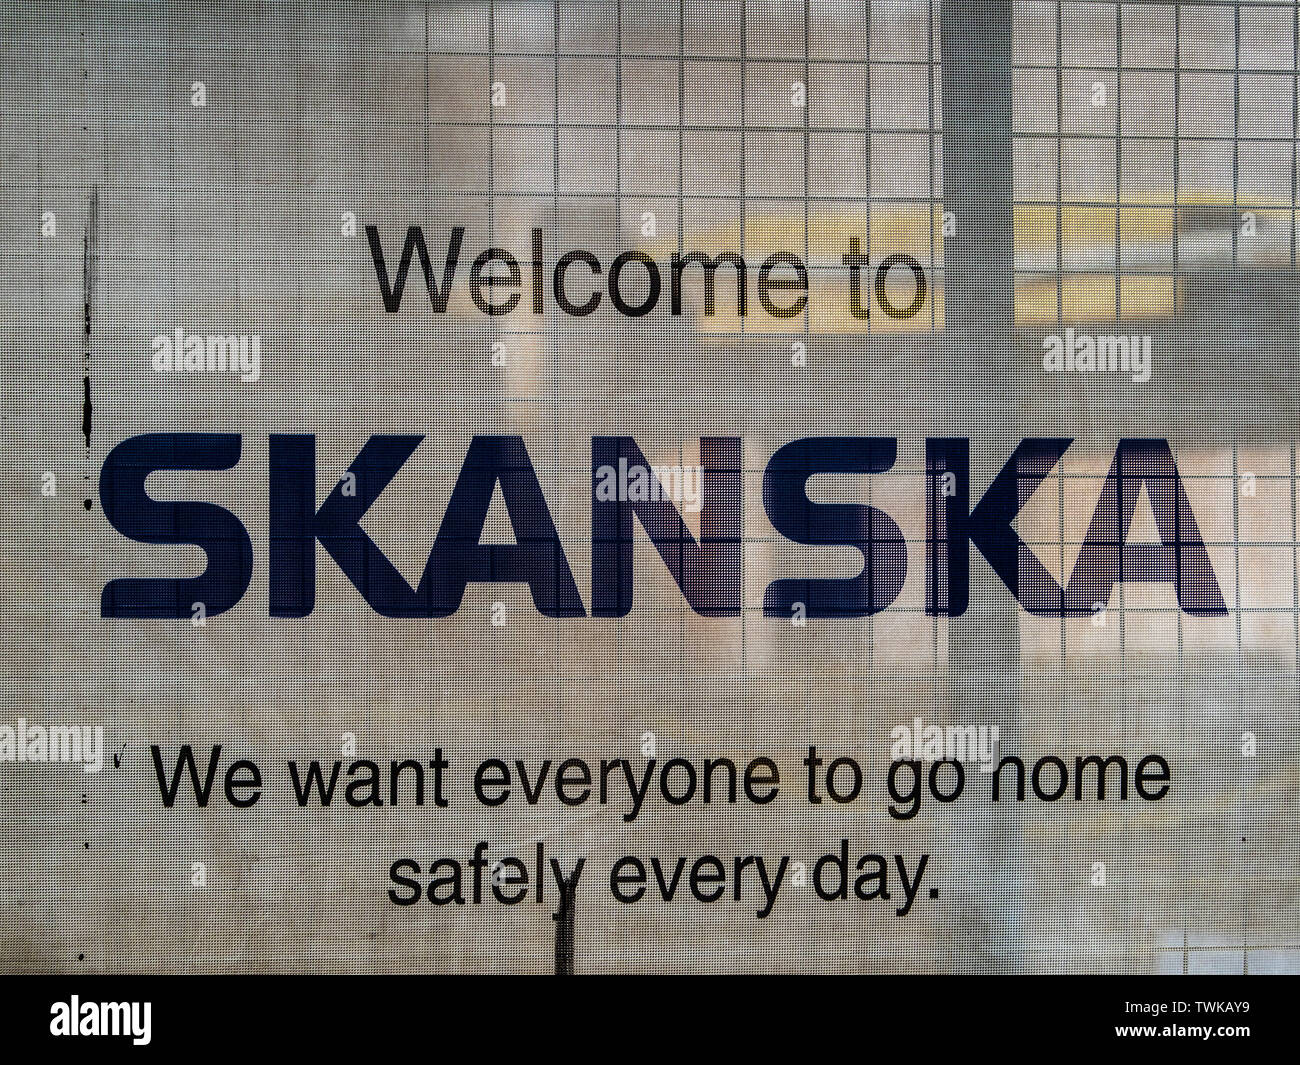 Skanska Building Site signs - Skanska is a Swedish based multinational construction and development company - Worlds 5th largest construction company Stock Photo